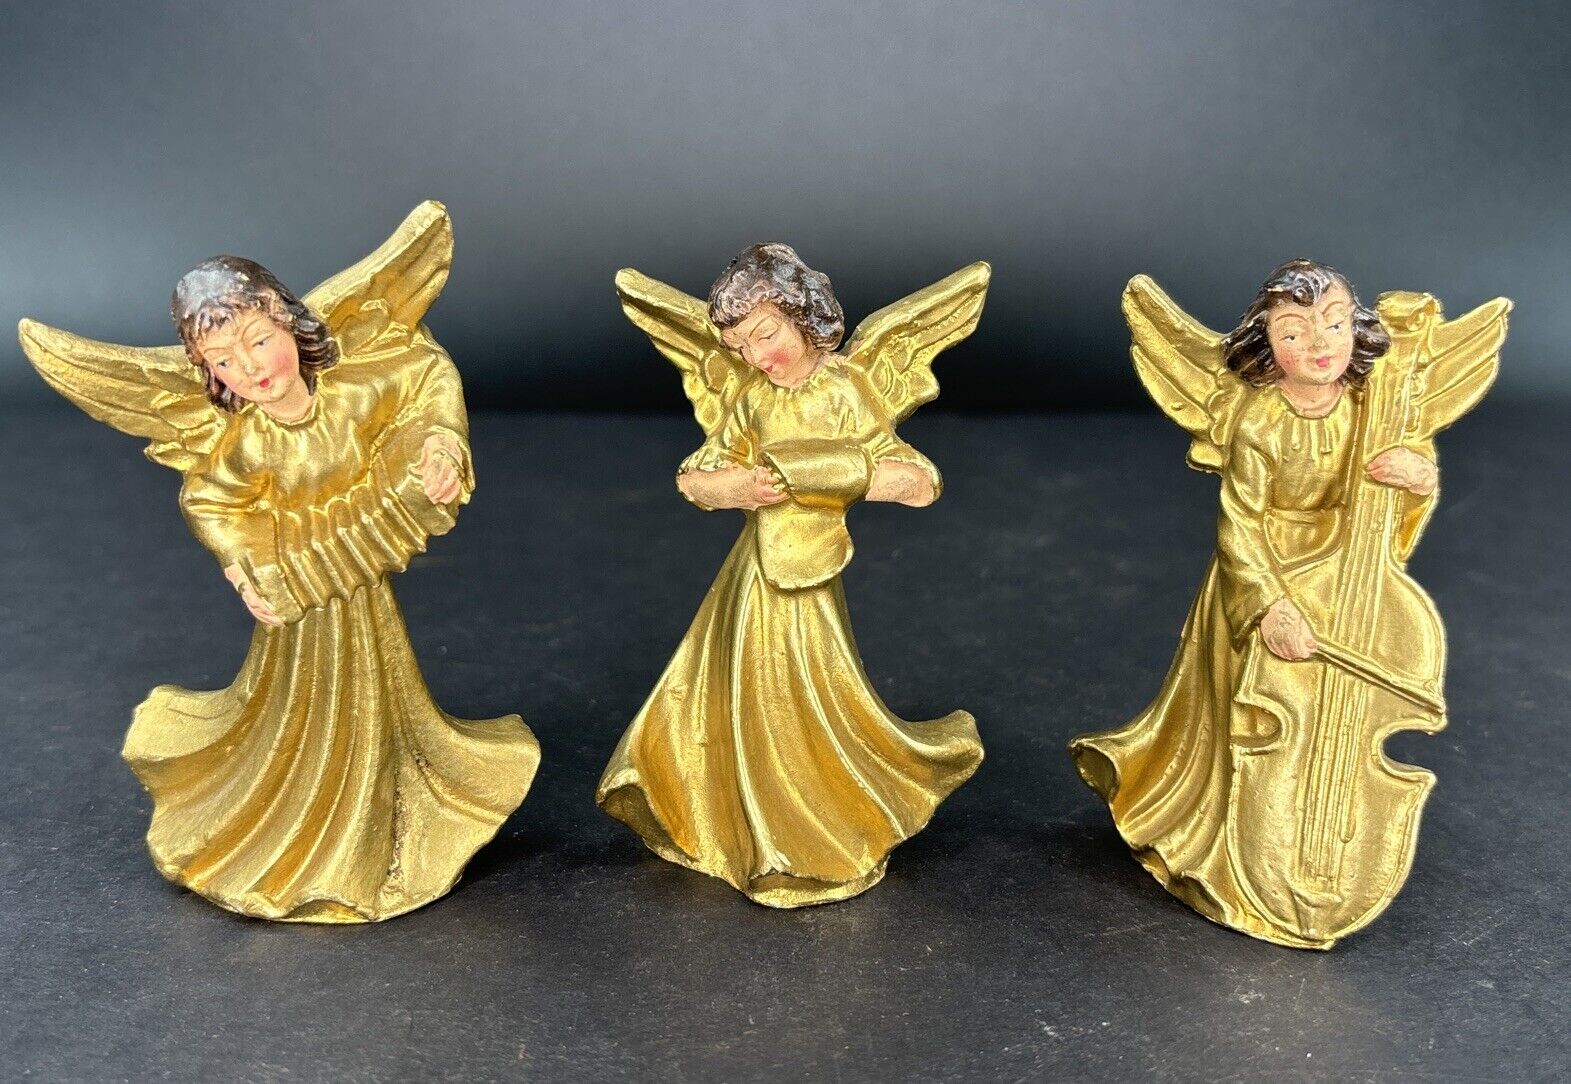 3 Vintage Angels w/instruments Gold Tone Hand Painted Christmas Ornaments ITALY